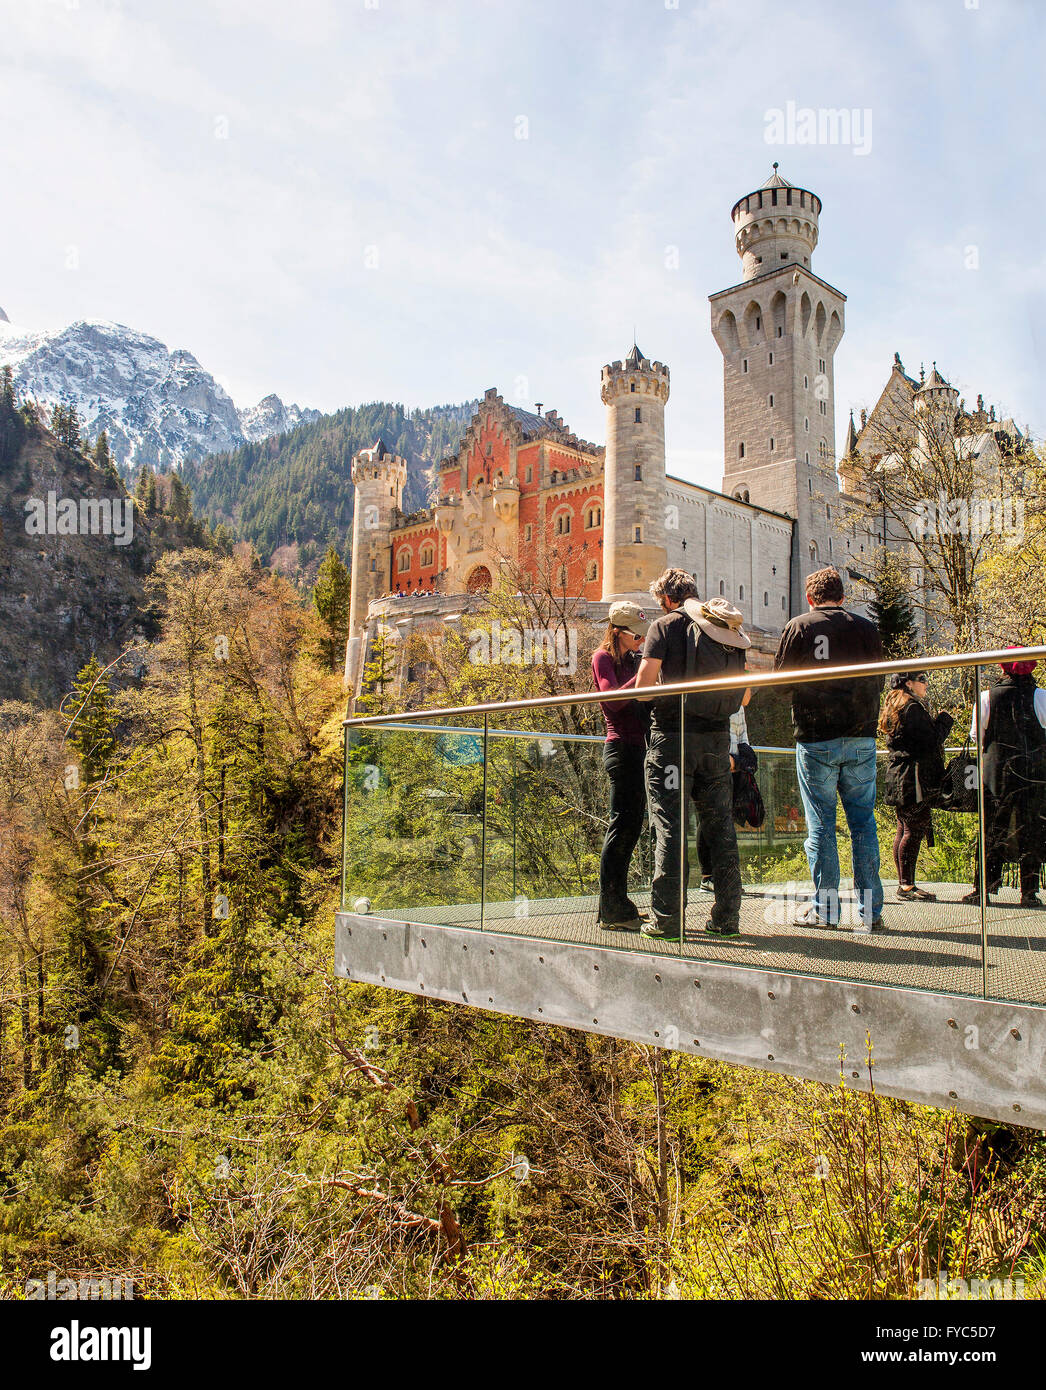 Neuschwanstein, Germany - April 21, 2016:  A group of tourists on a scenic plateau in front of famous Neuschwanstein Castle in B Stock Photo